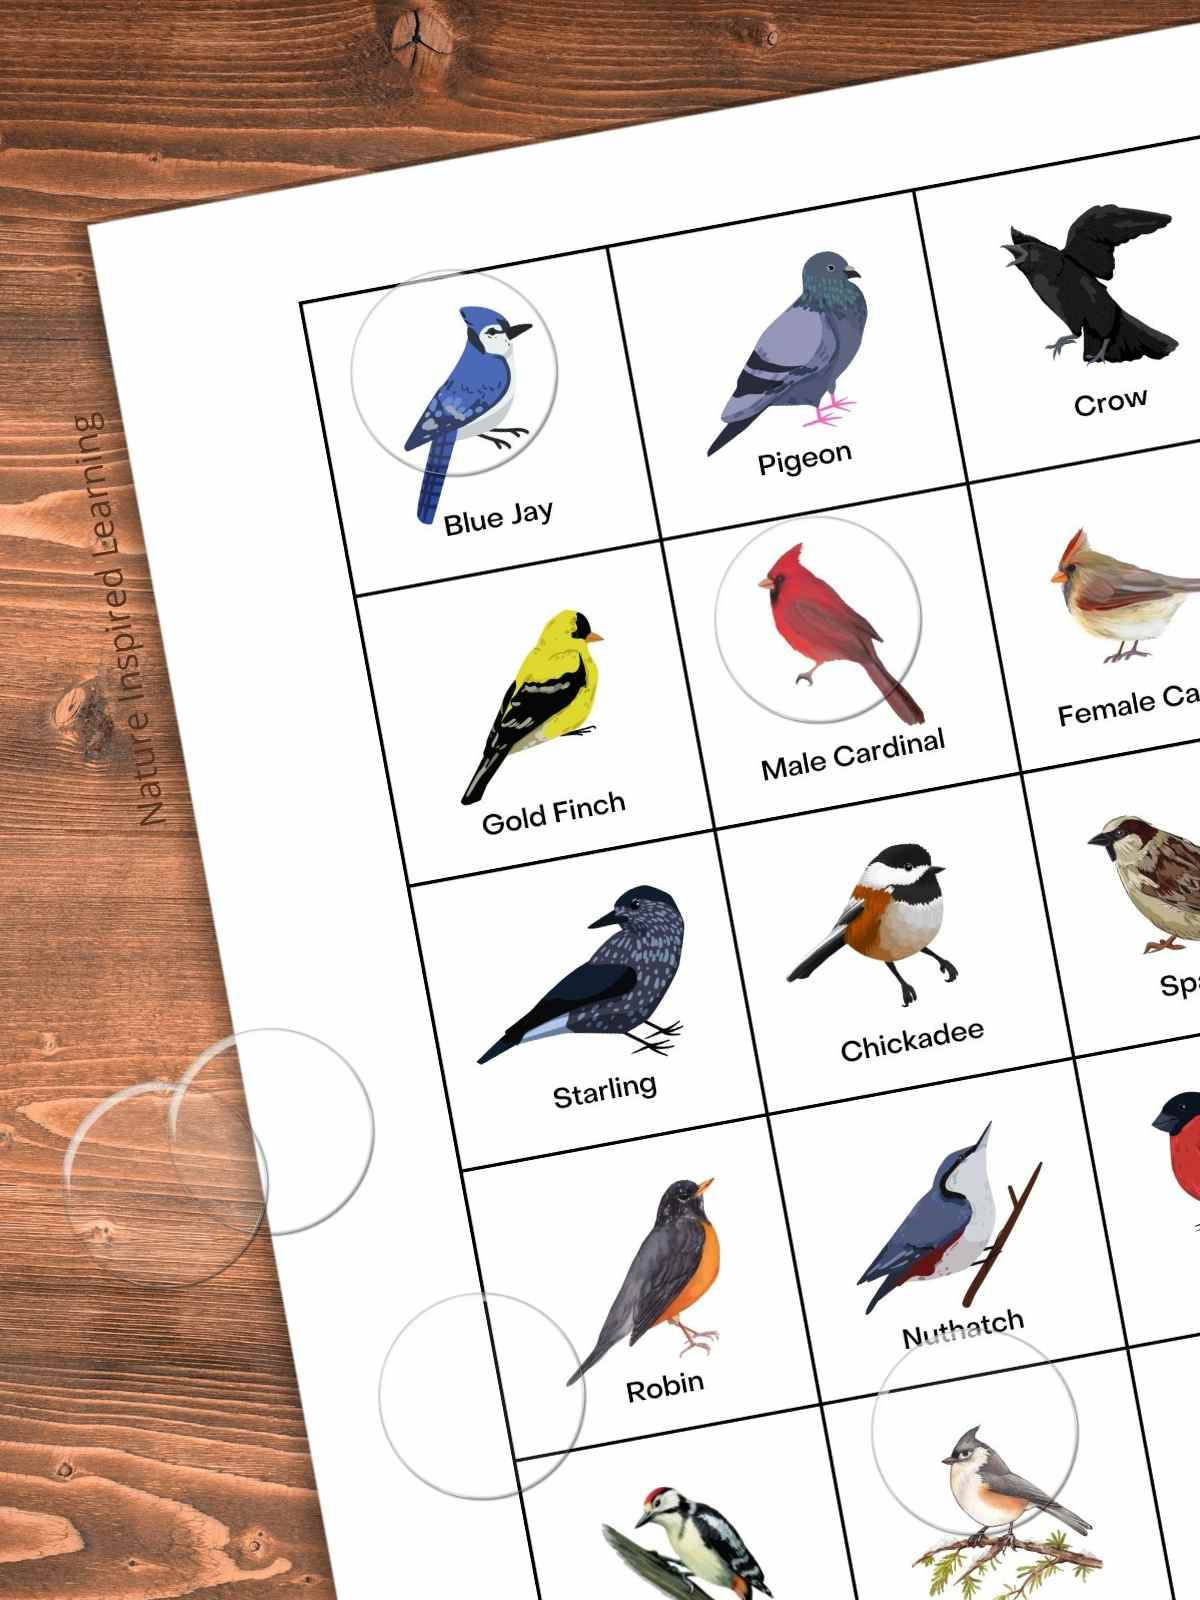 calling cards for a backyard bird bingo game with colorful real life bird clip art on a wooden background with clear plastic bingo chips